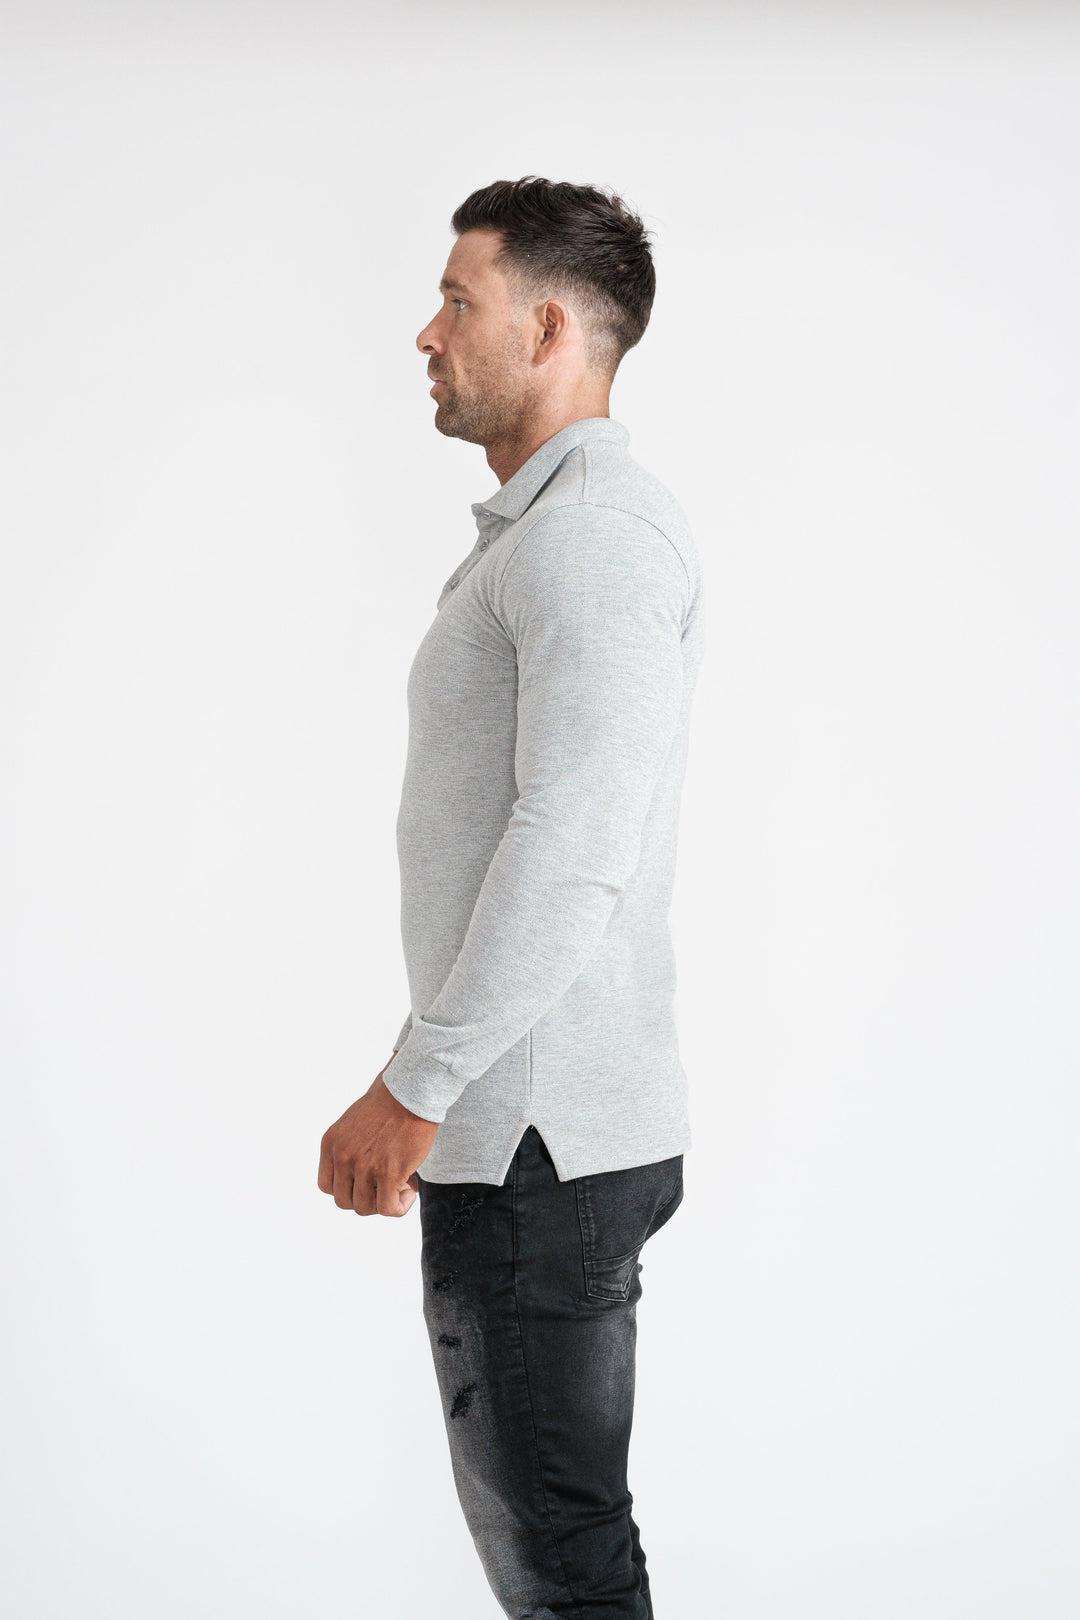 Mens Grey Muscle Fit Polo Shirt. A Proportionally Fitted and Muscle Fit Polo. Ideal for athletes.